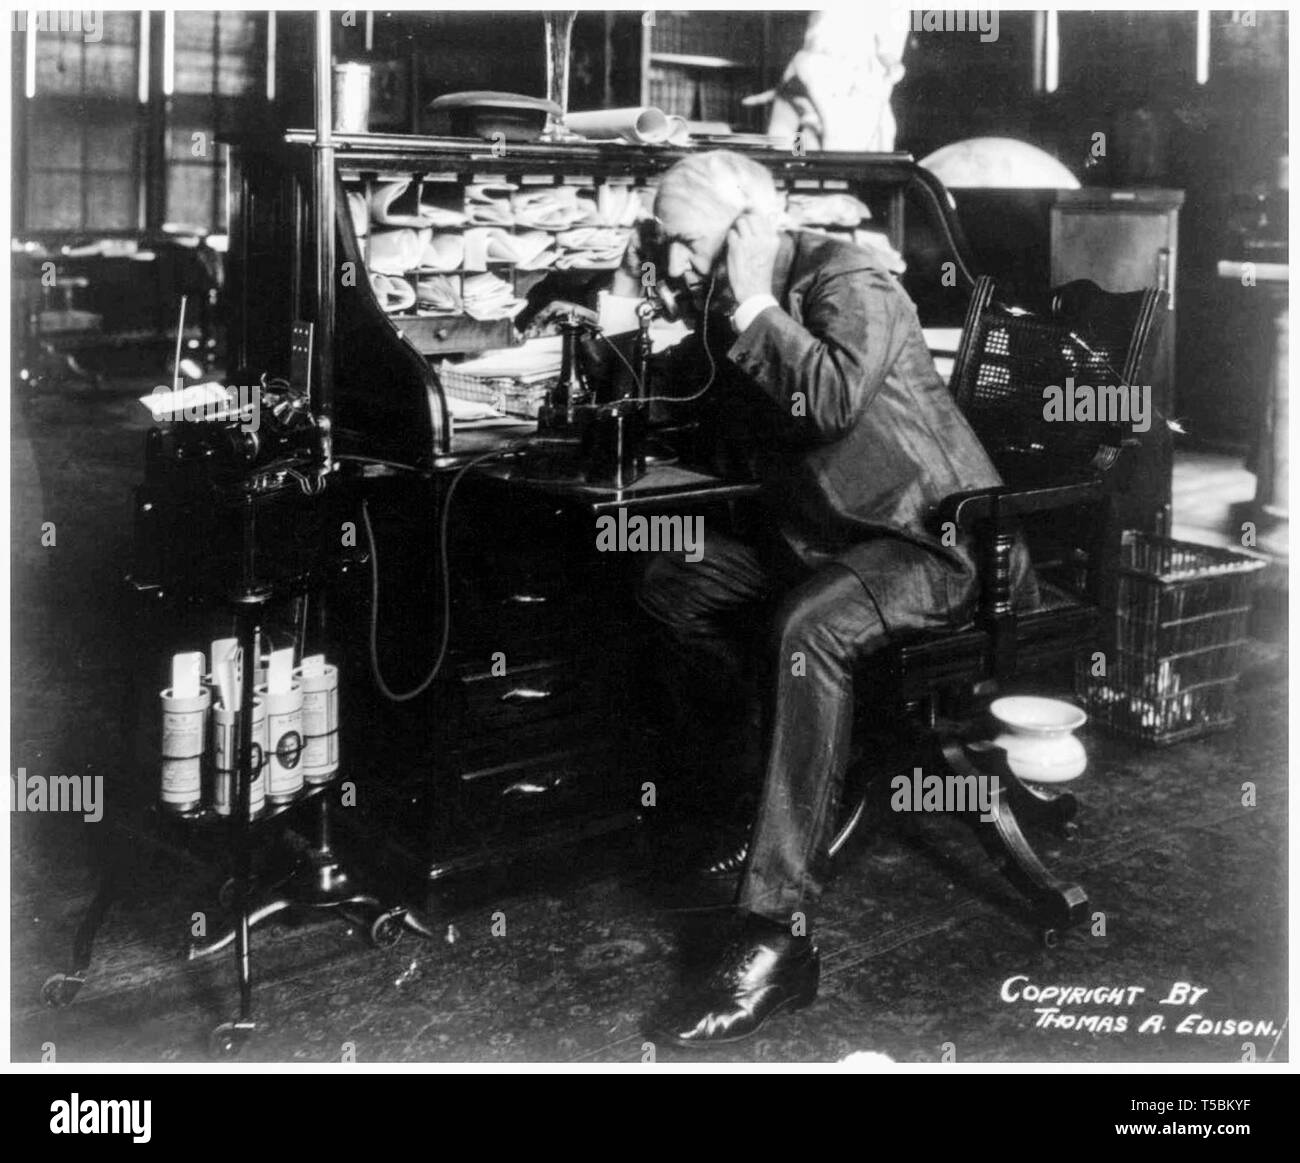 Thomas Edison (1847-1931) at his desk, talking on telephone, showing a wax cylinder dictating machine and cylinders, 1914 Stock Photo